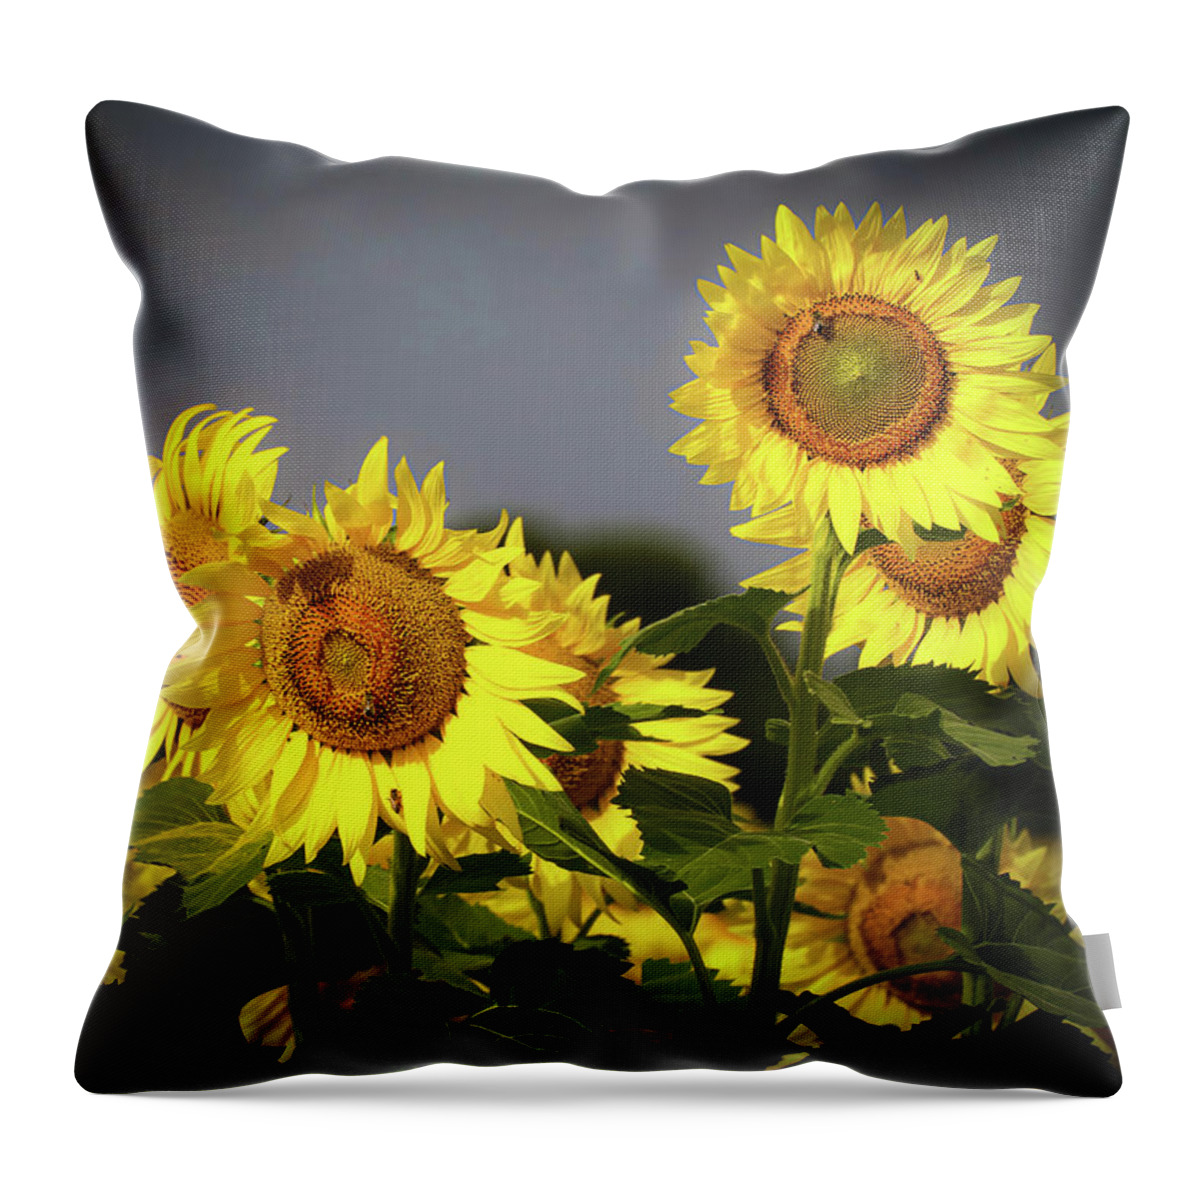 Sunflowers Throw Pillow featuring the photograph Sunflowers on a Cloudy Day by Pam Rendall